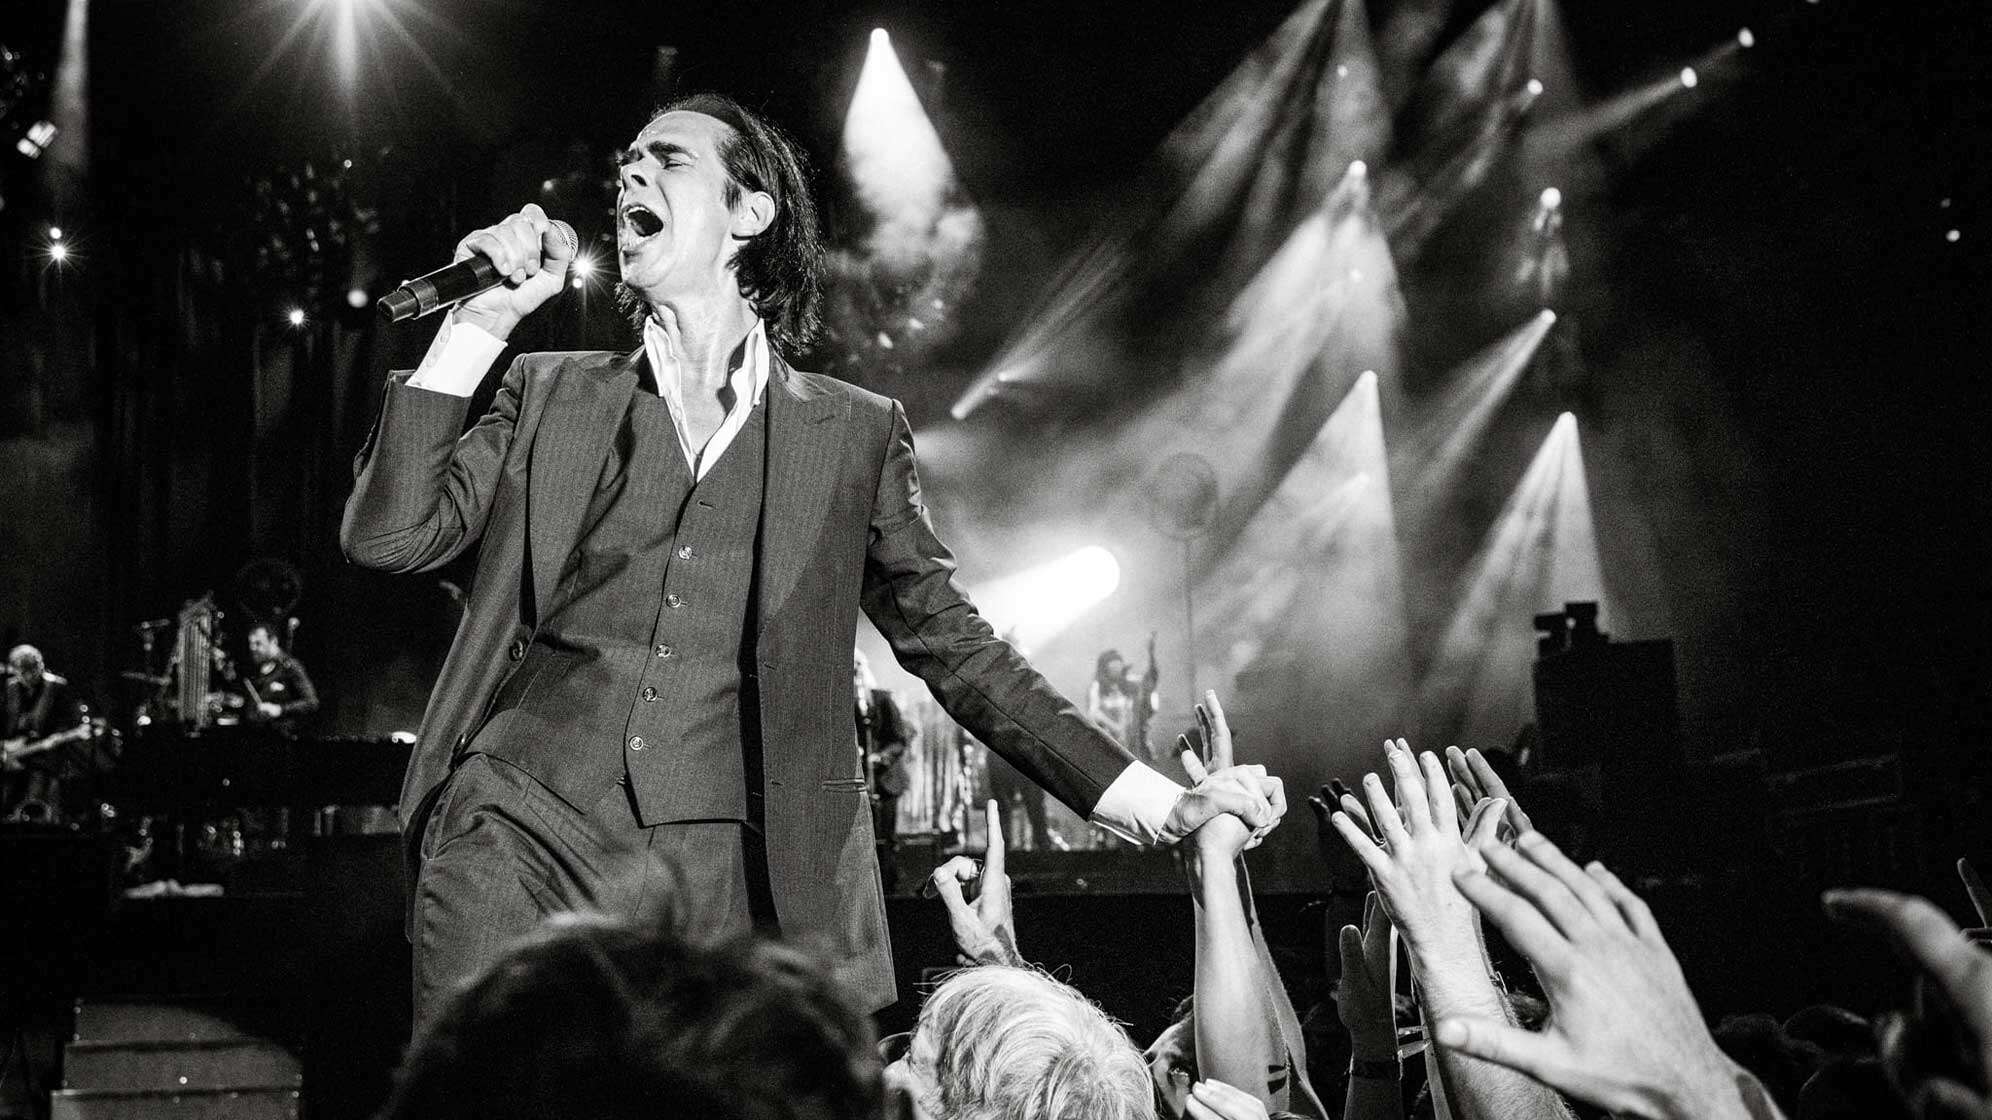 Bandfoto von Nick Cave and the Bad Seeds